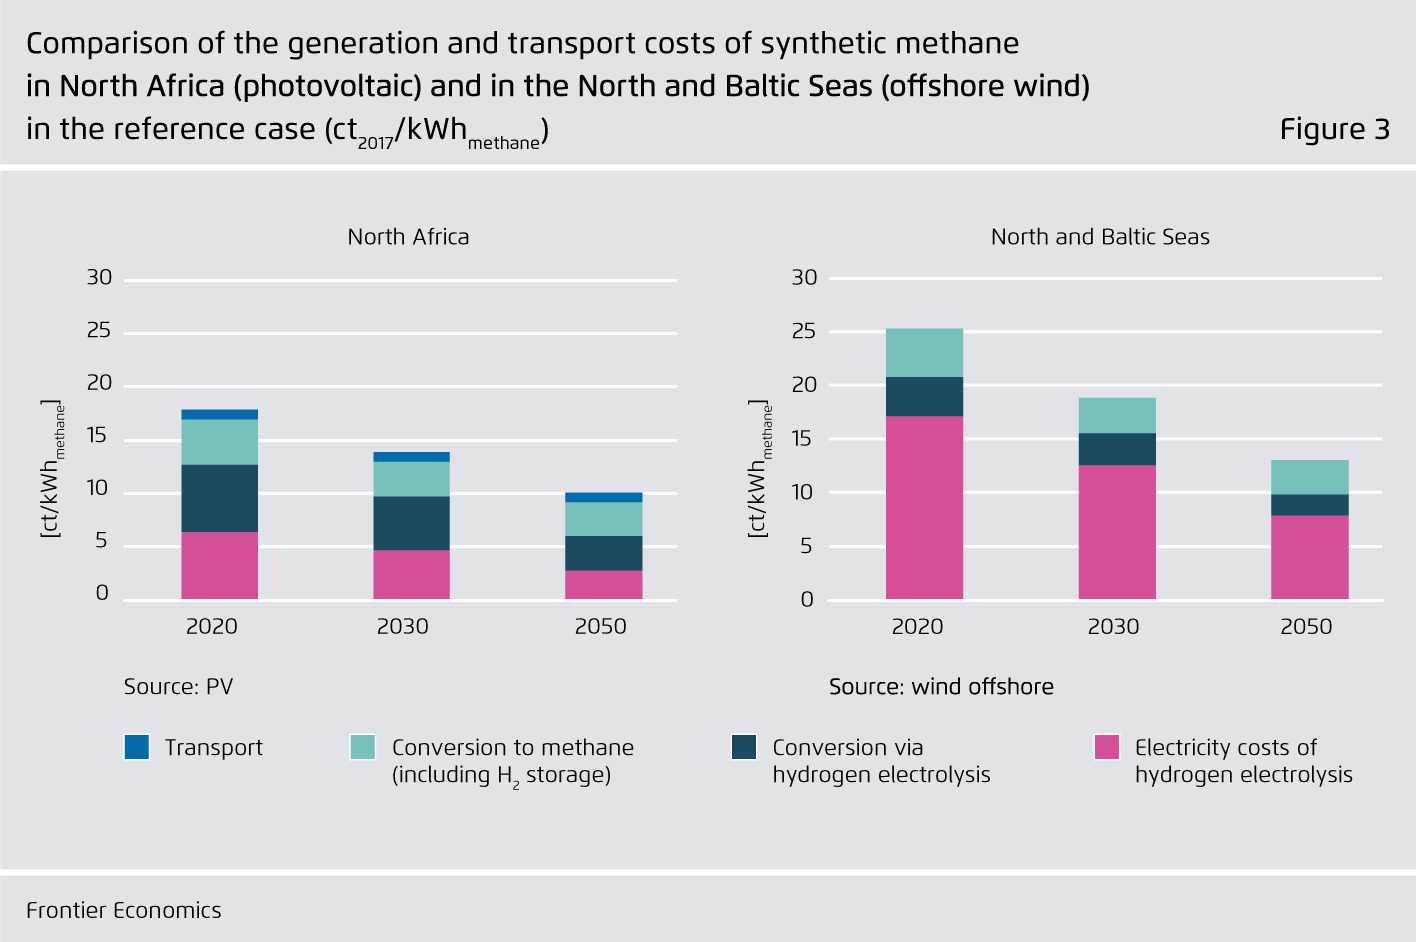 Preview for Comparison of the generation and transport costs of synthetic methane in North Africa (photovoltaic)  and in the North and Baltic Seas (offshore wind) ..in the reference case (ct2017/kWhmethane)